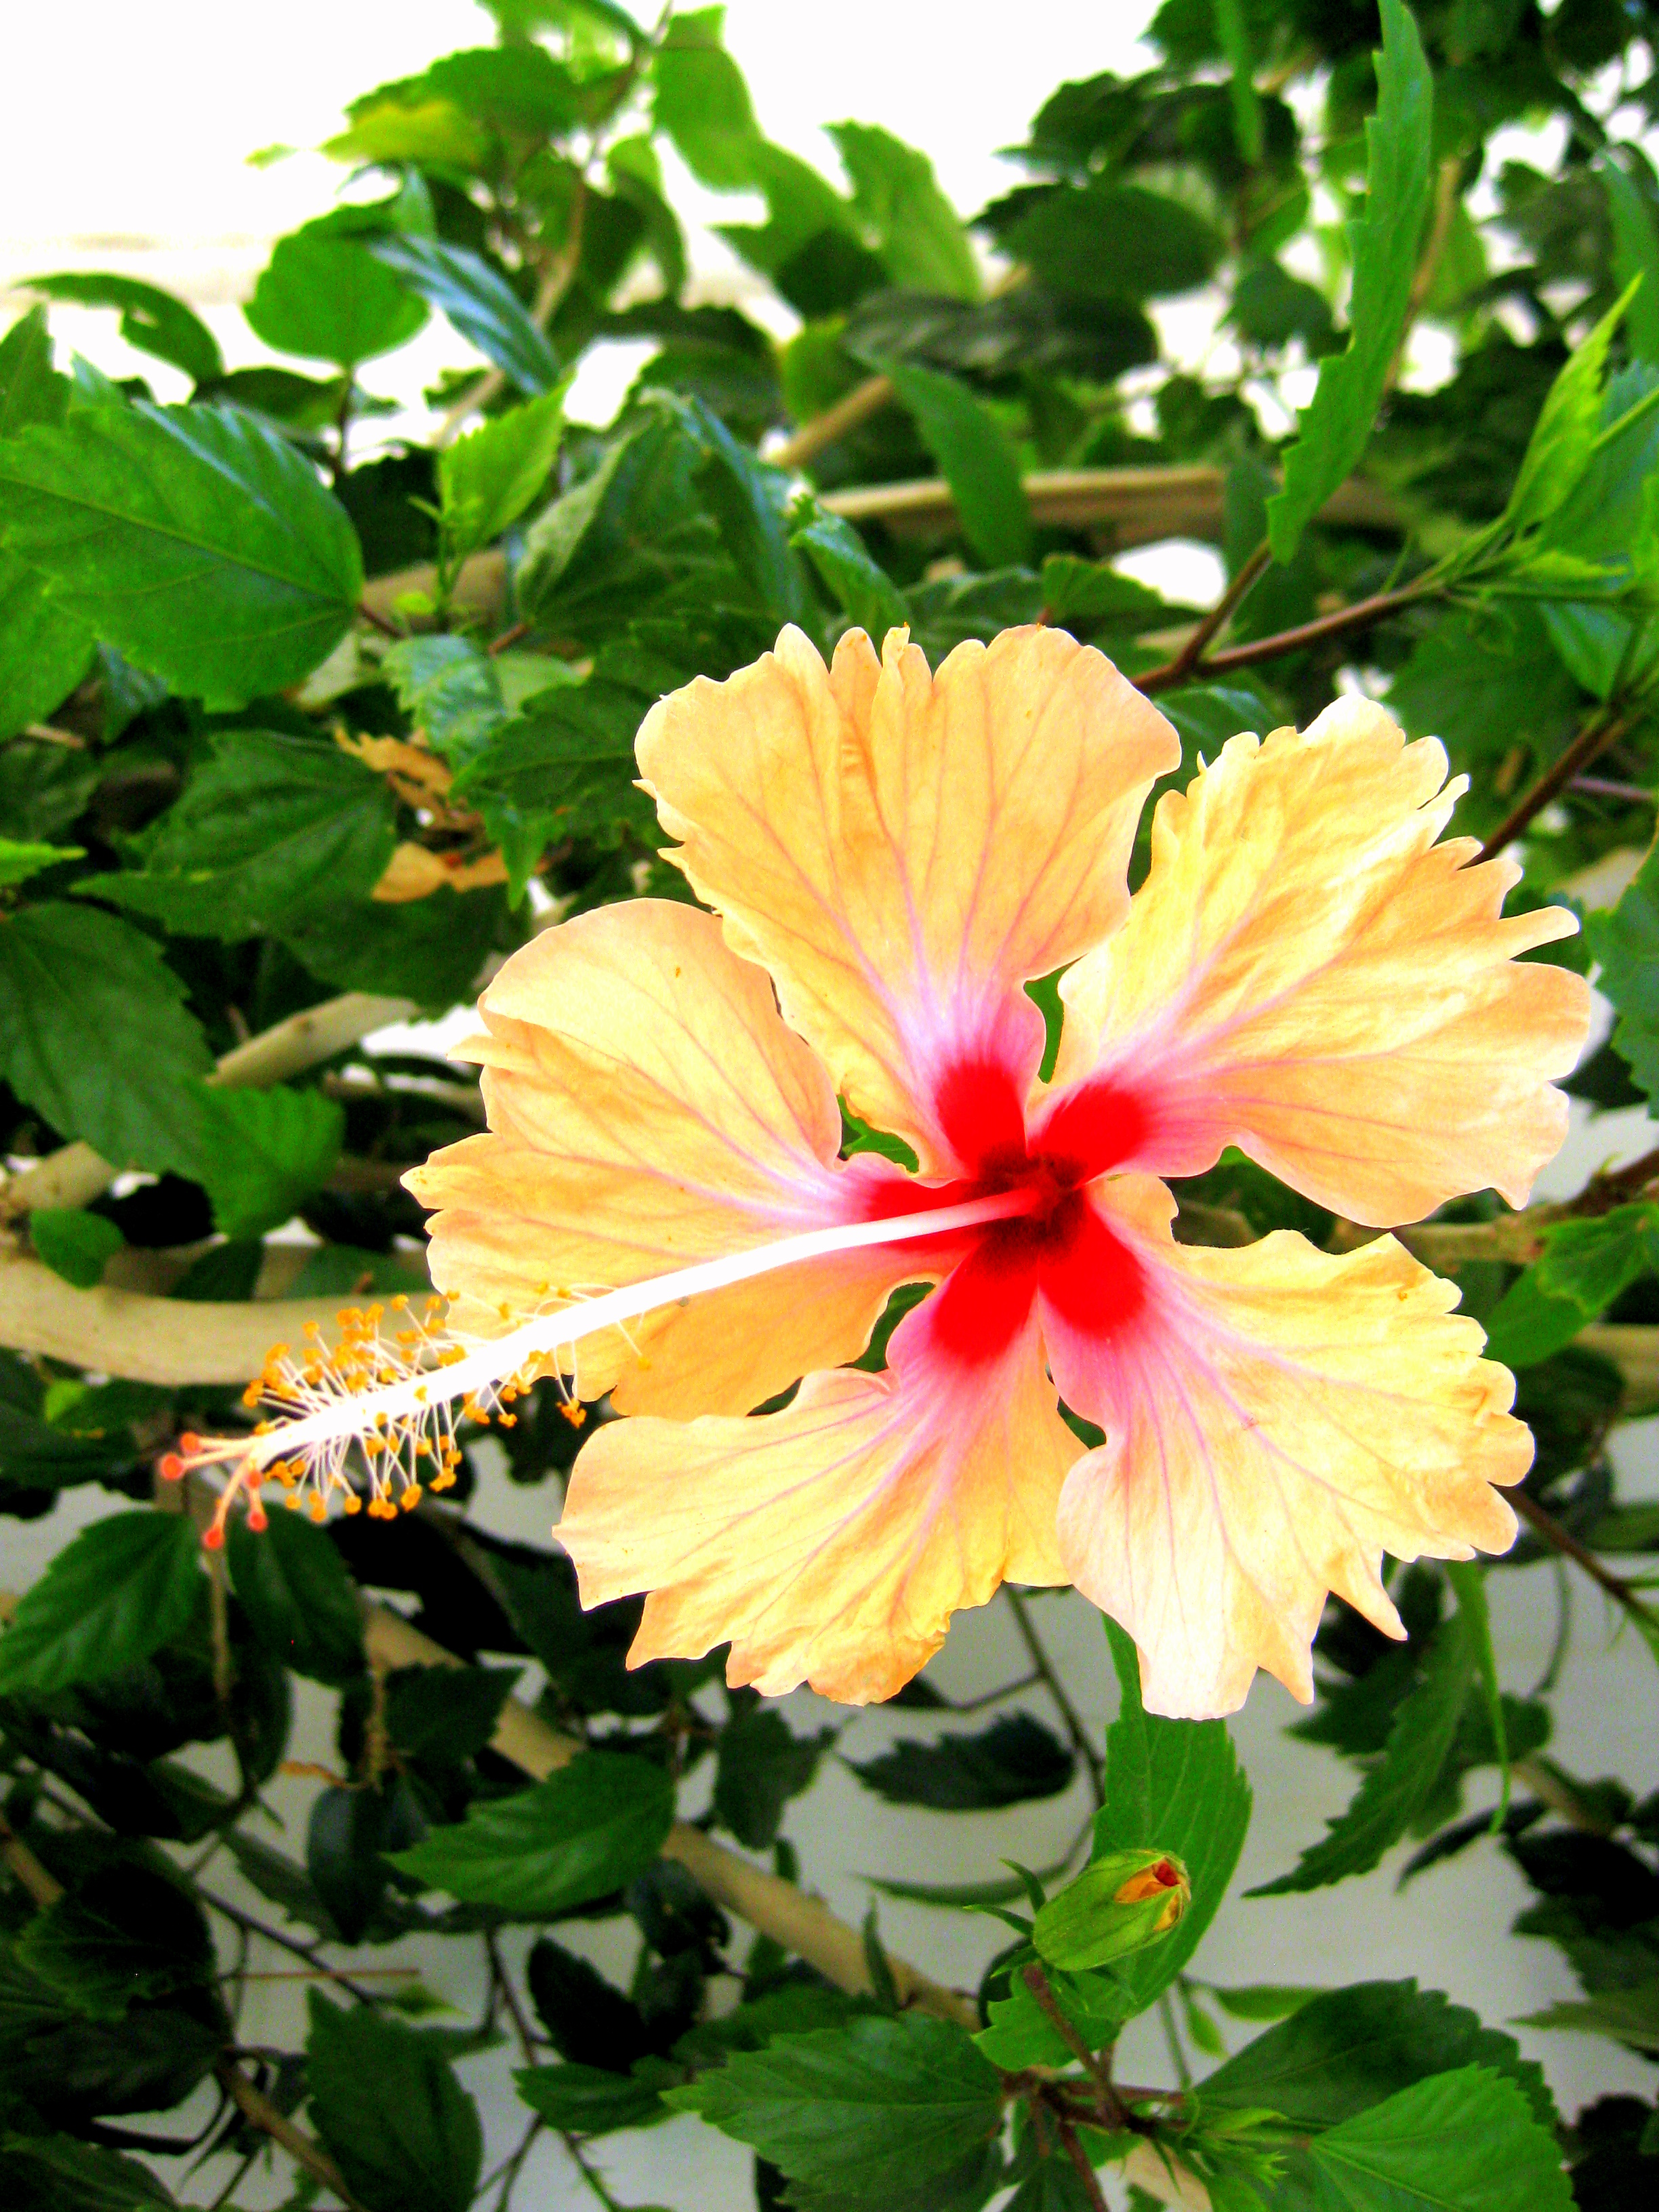 Tropical Flowers, Hawaiian flowers, gifts and floral arrangements from the